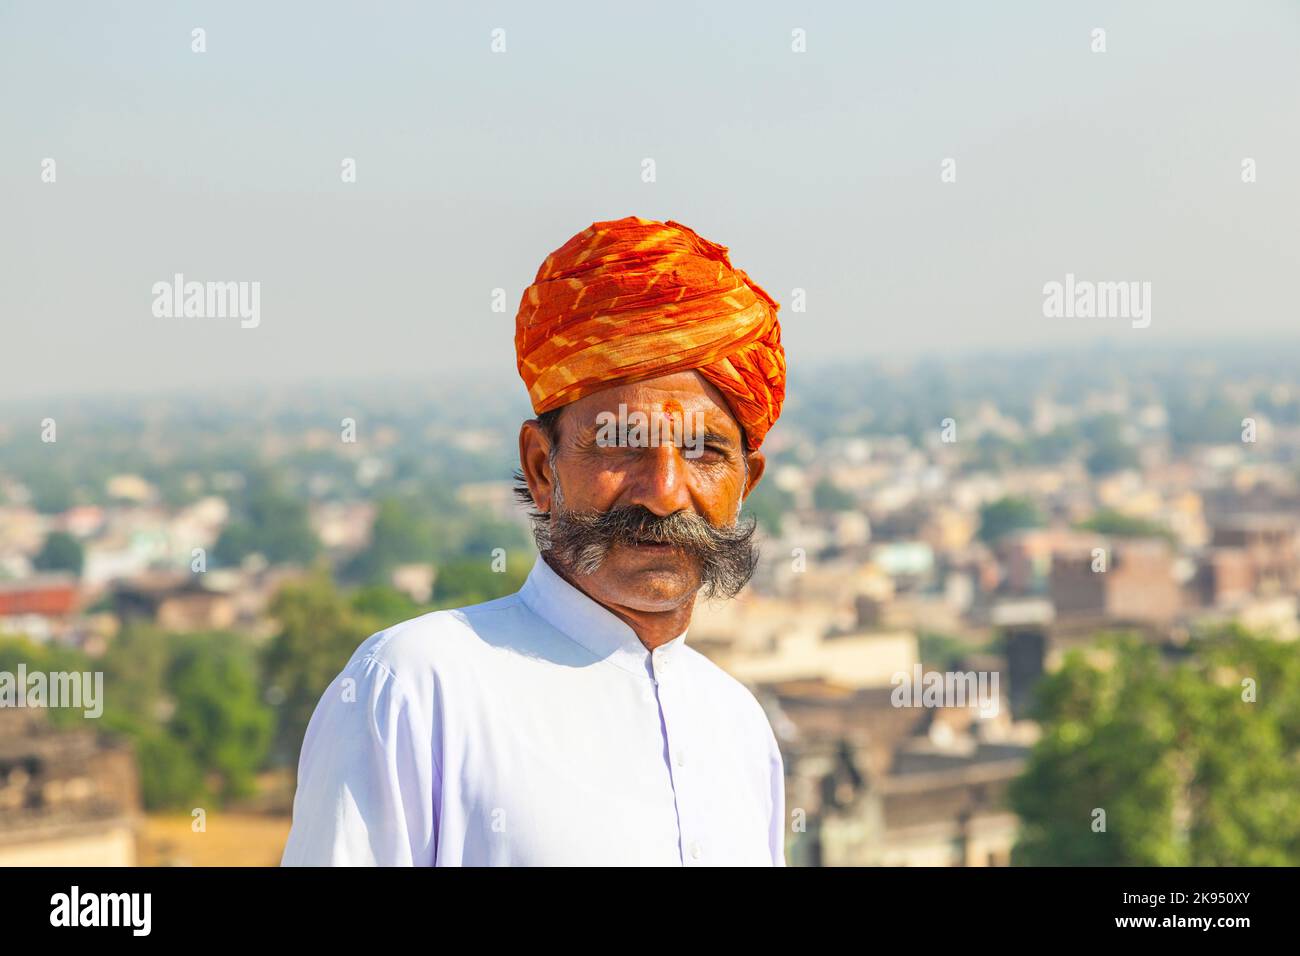 MANDAWA, INDIA - OCT 25: A Rajasthani man wearing traditional colorful turban and loves to pose in the palace for tourists on OCT 25, 2012 in Pushkar, Stock Photo